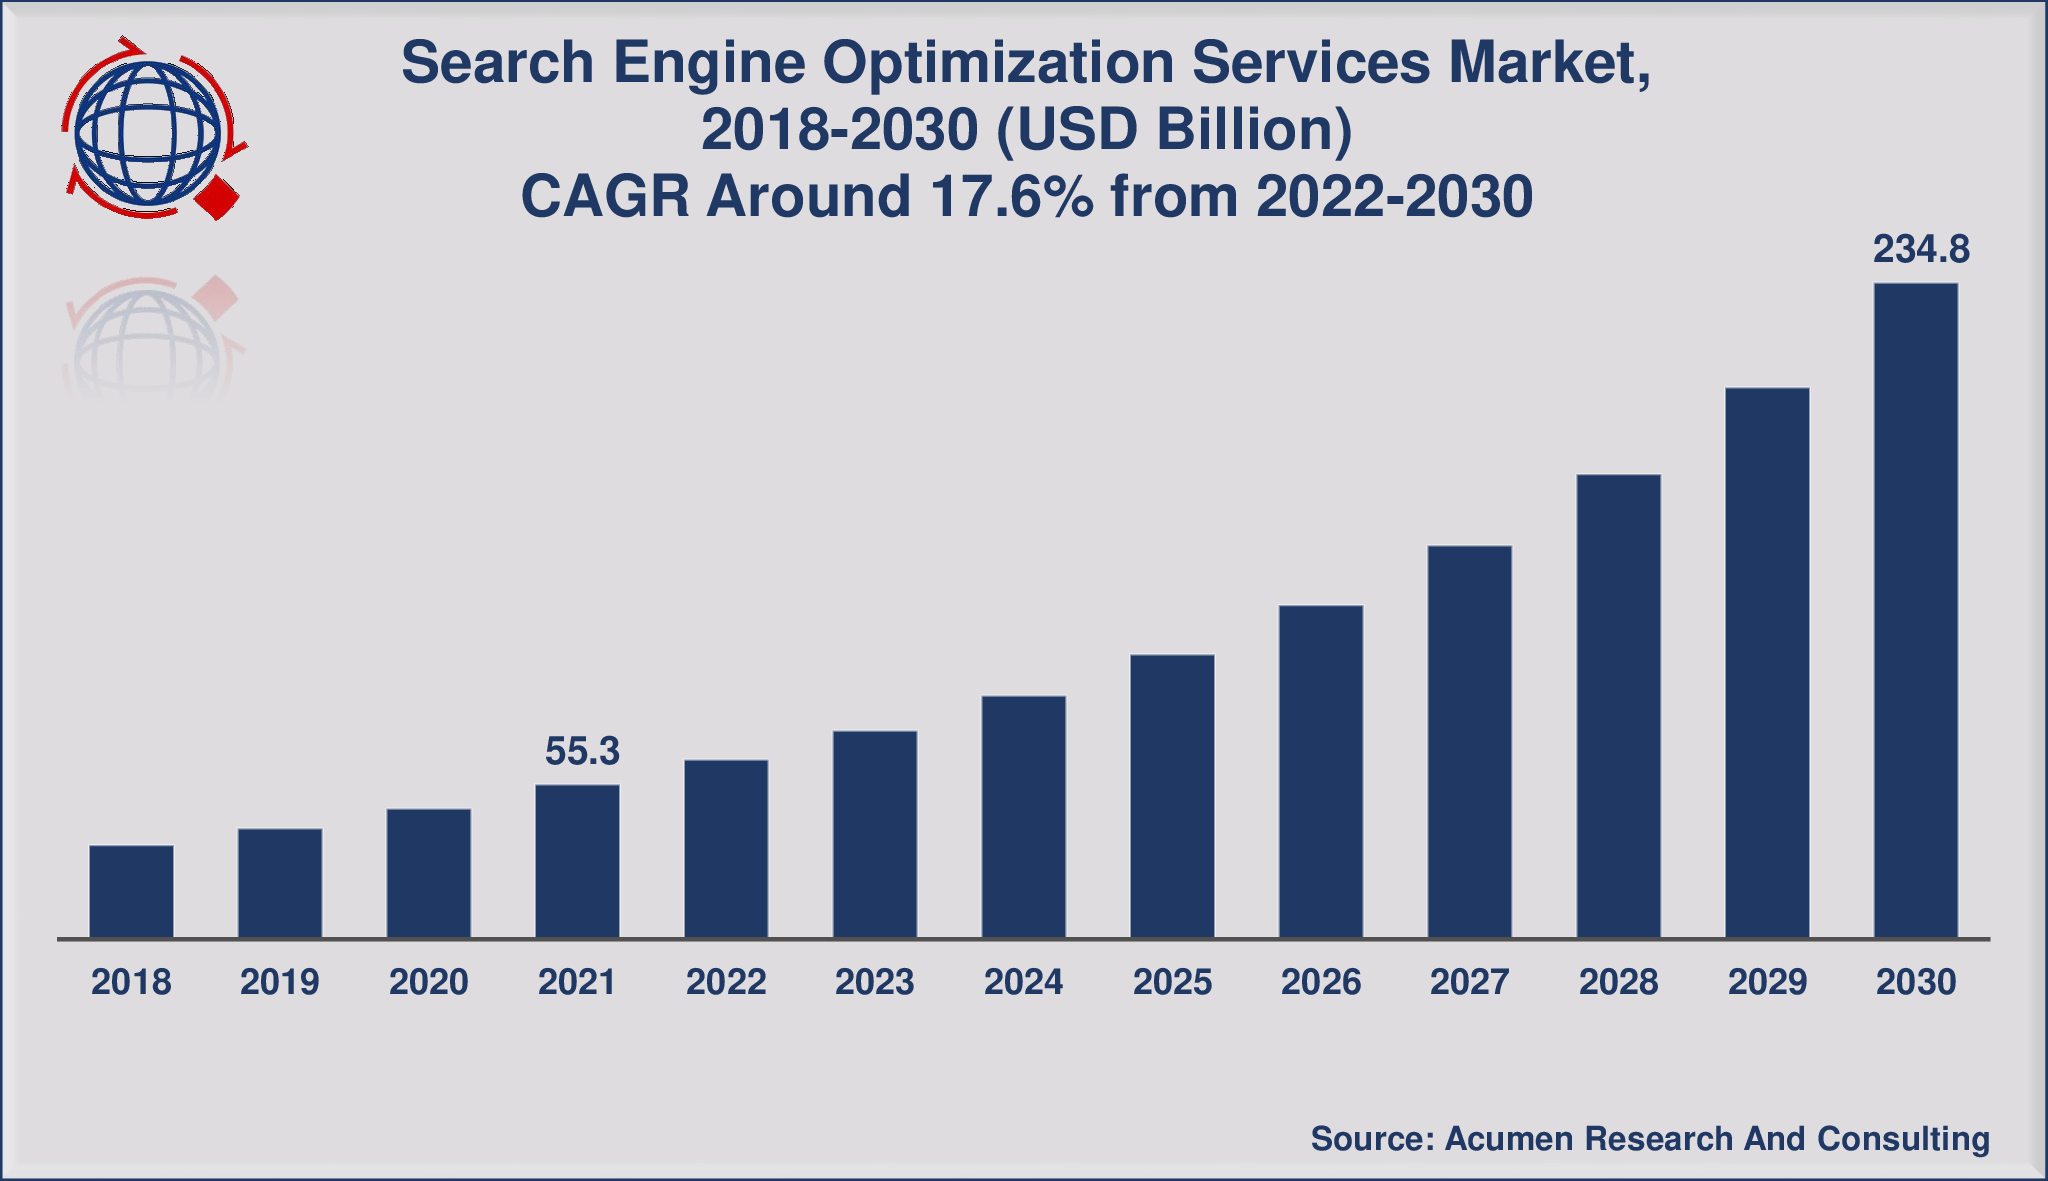 Search Engine Optimization Services Market Size Growing at